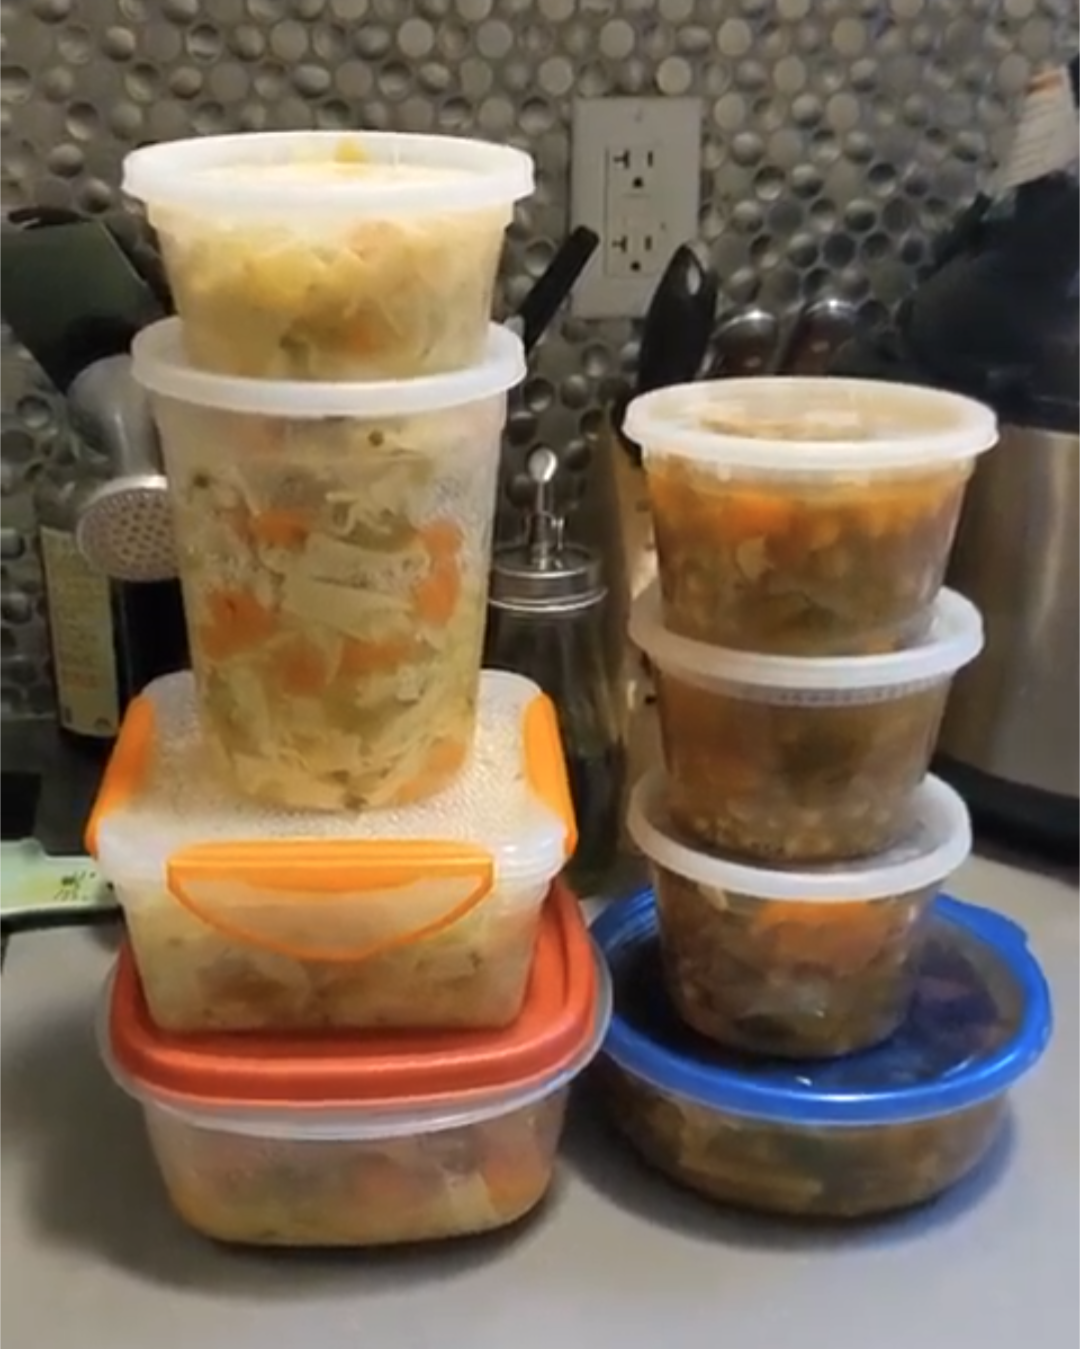 plastic to-go containers of soup stacked